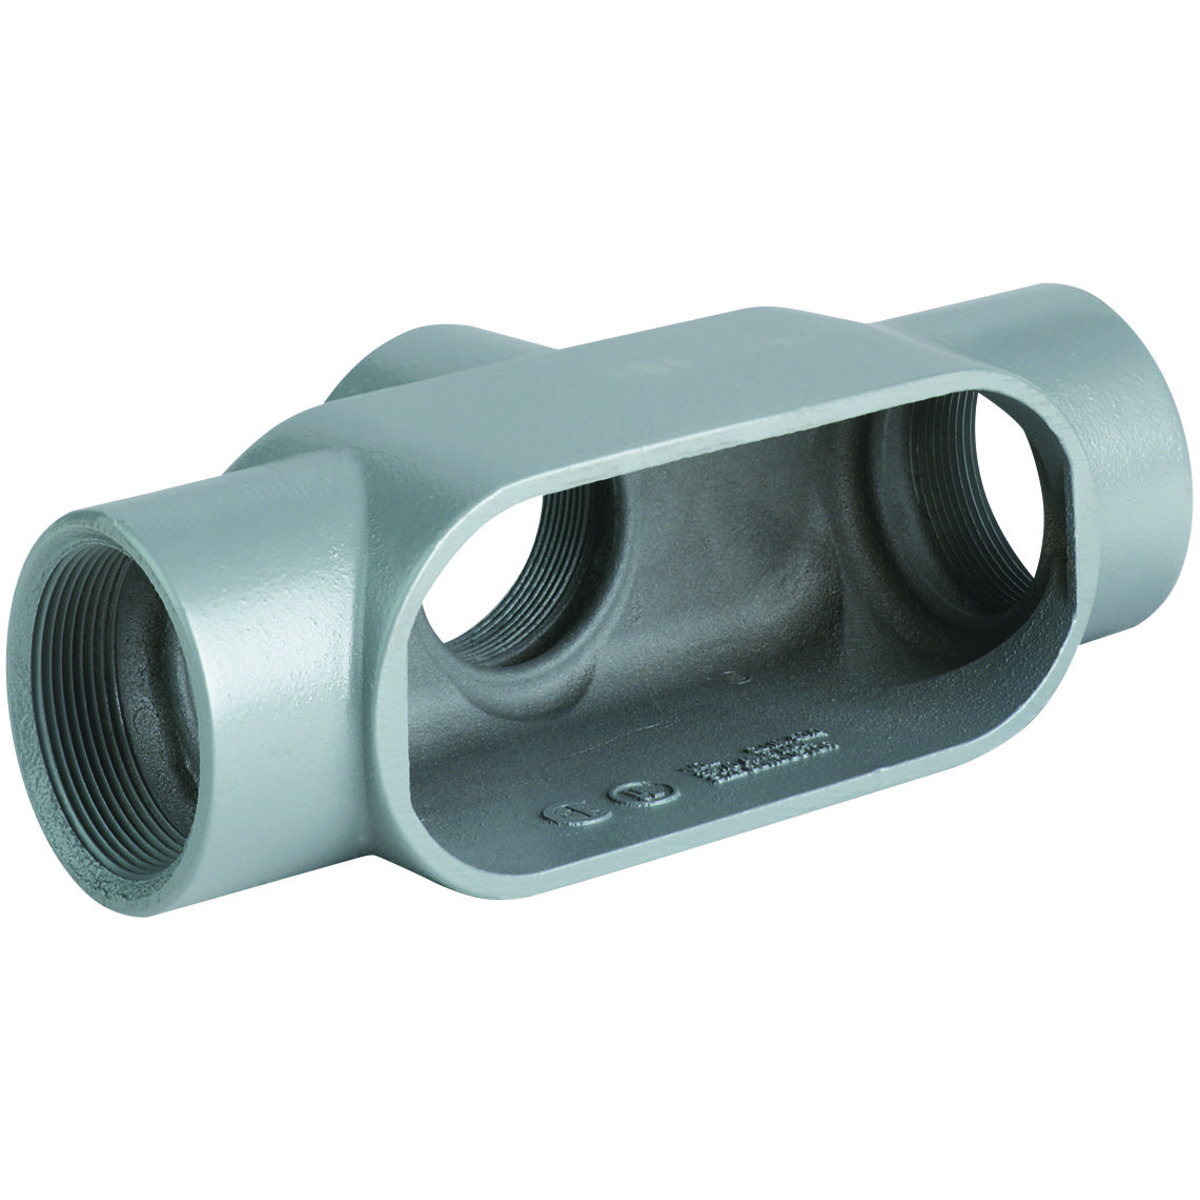 DURALOY 7 SERIES - IRON CONDUIT BODY - TB TYPE - HUB SIZE 3/4 INCH -VOLUME 9.5 CUBIC INCHES